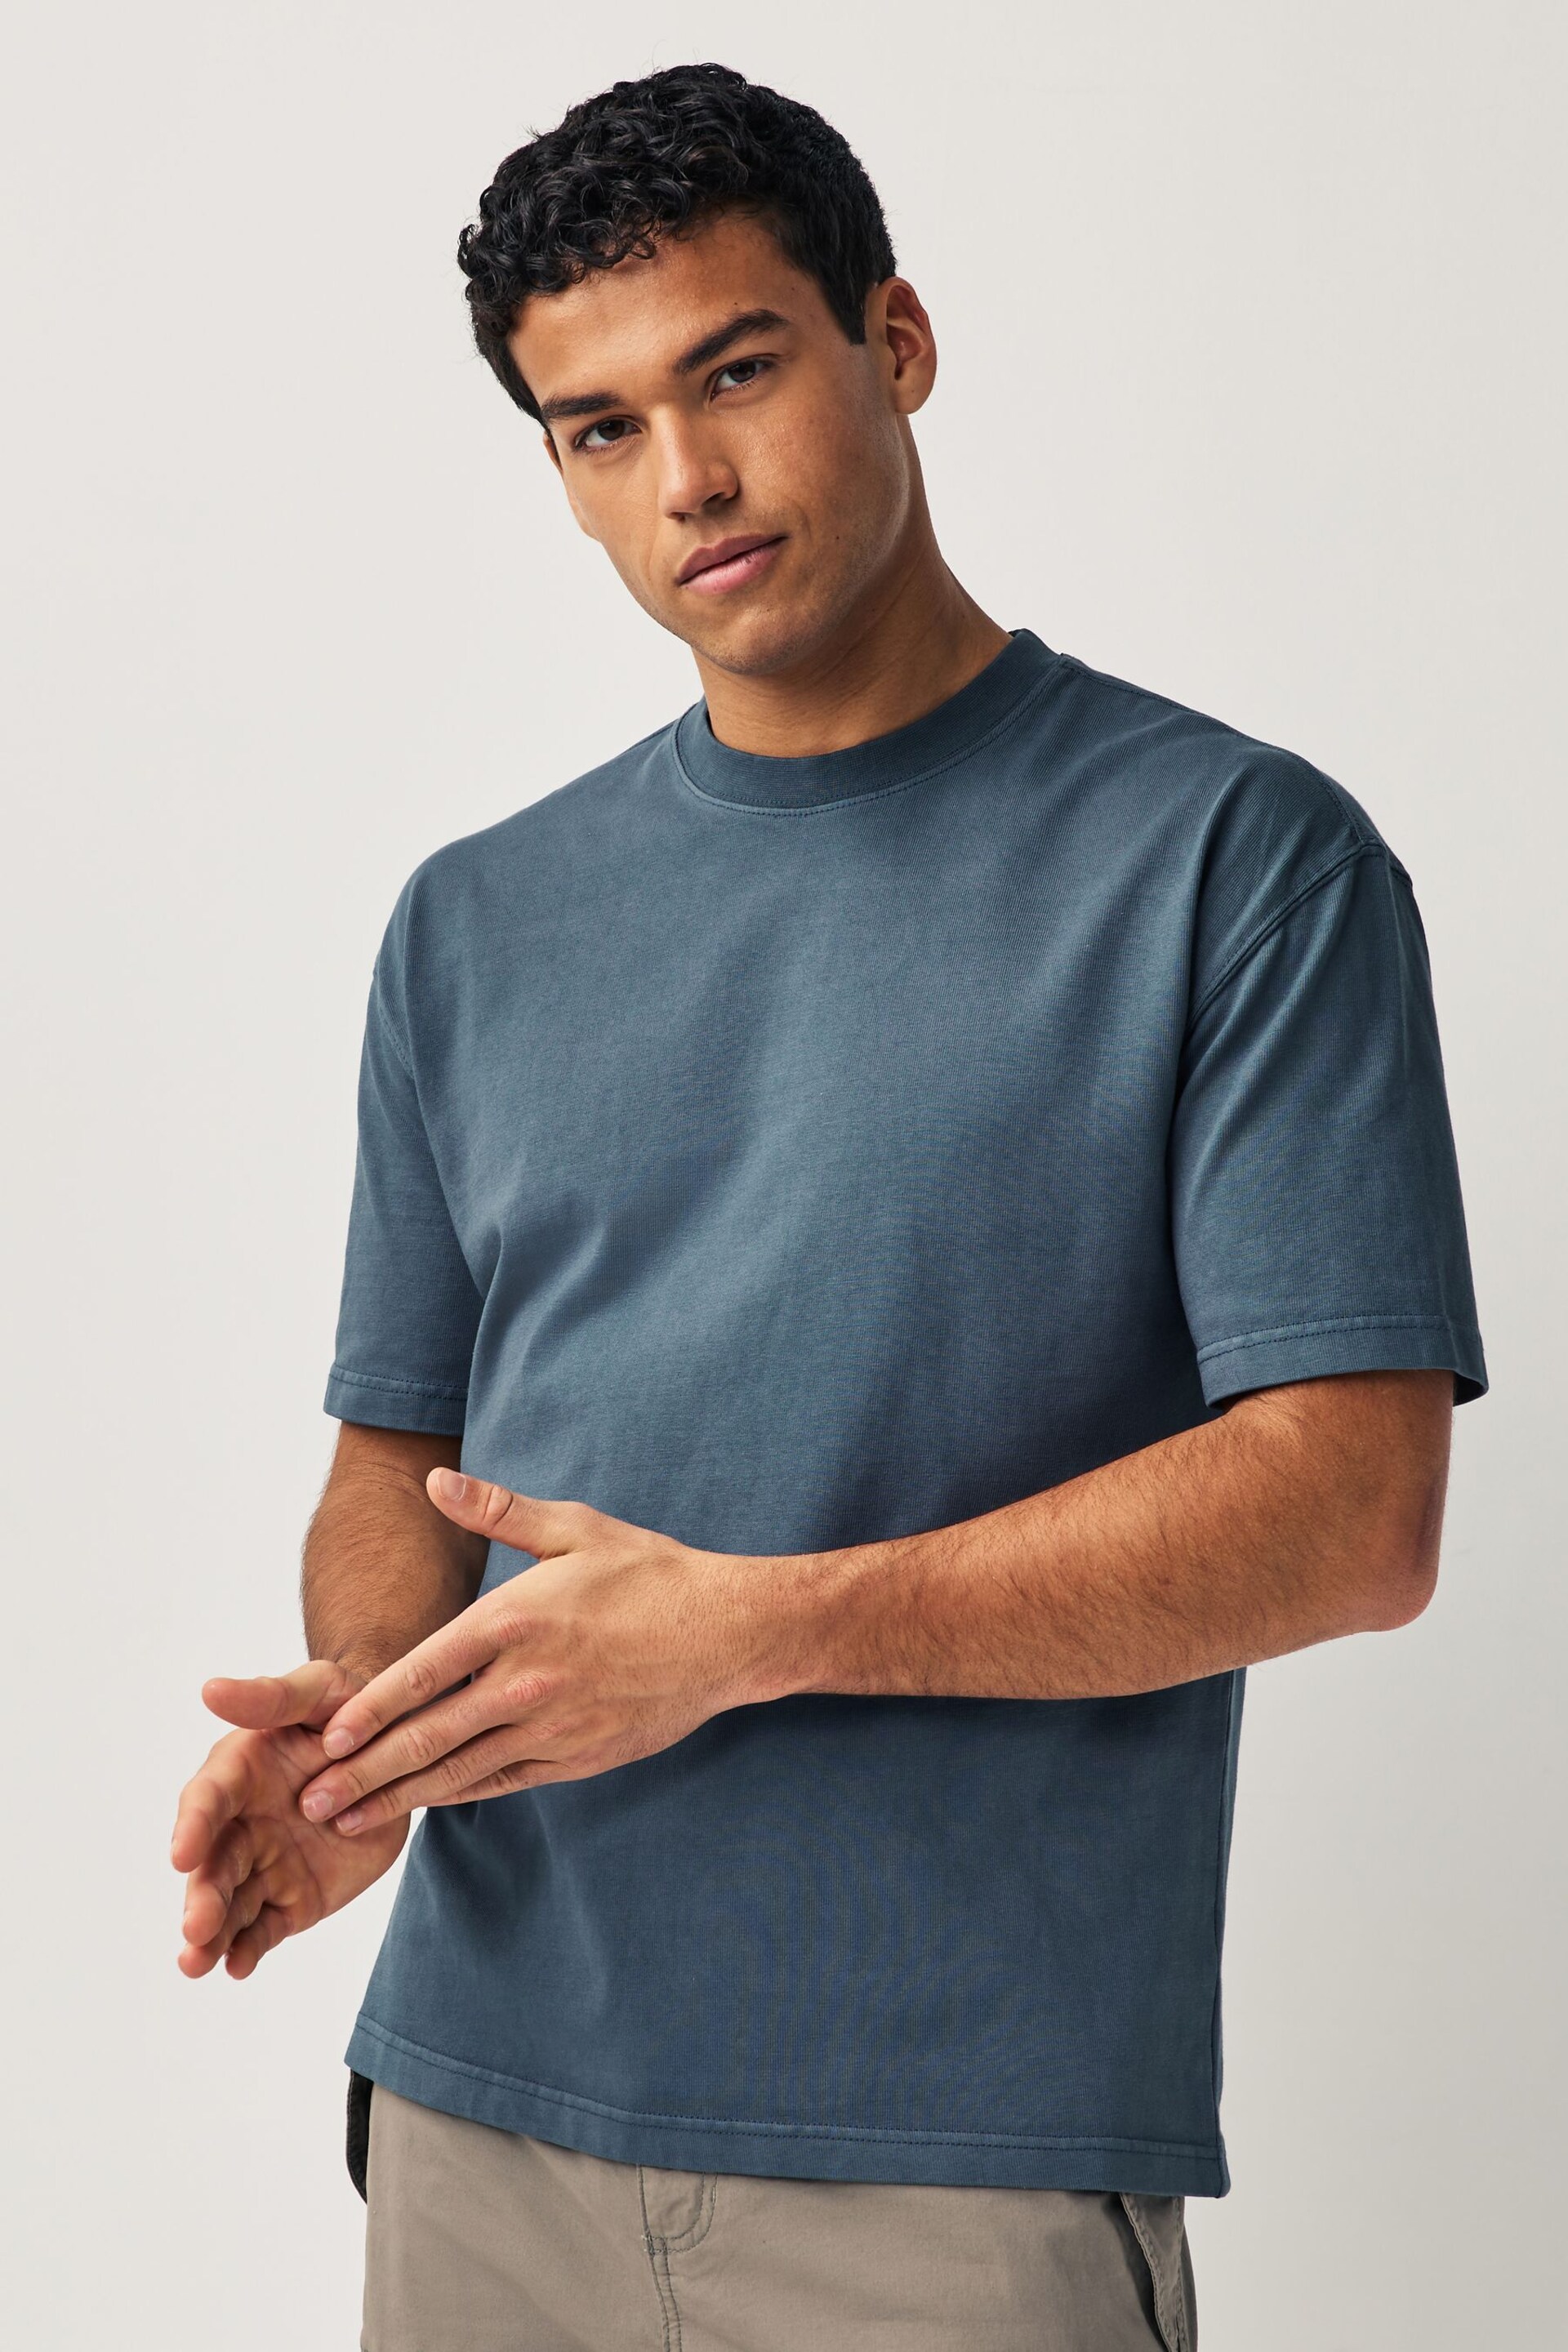 Navy Blue Garment Dye Relaxed Fit Heavyweight T-Shirt - Image 1 of 8